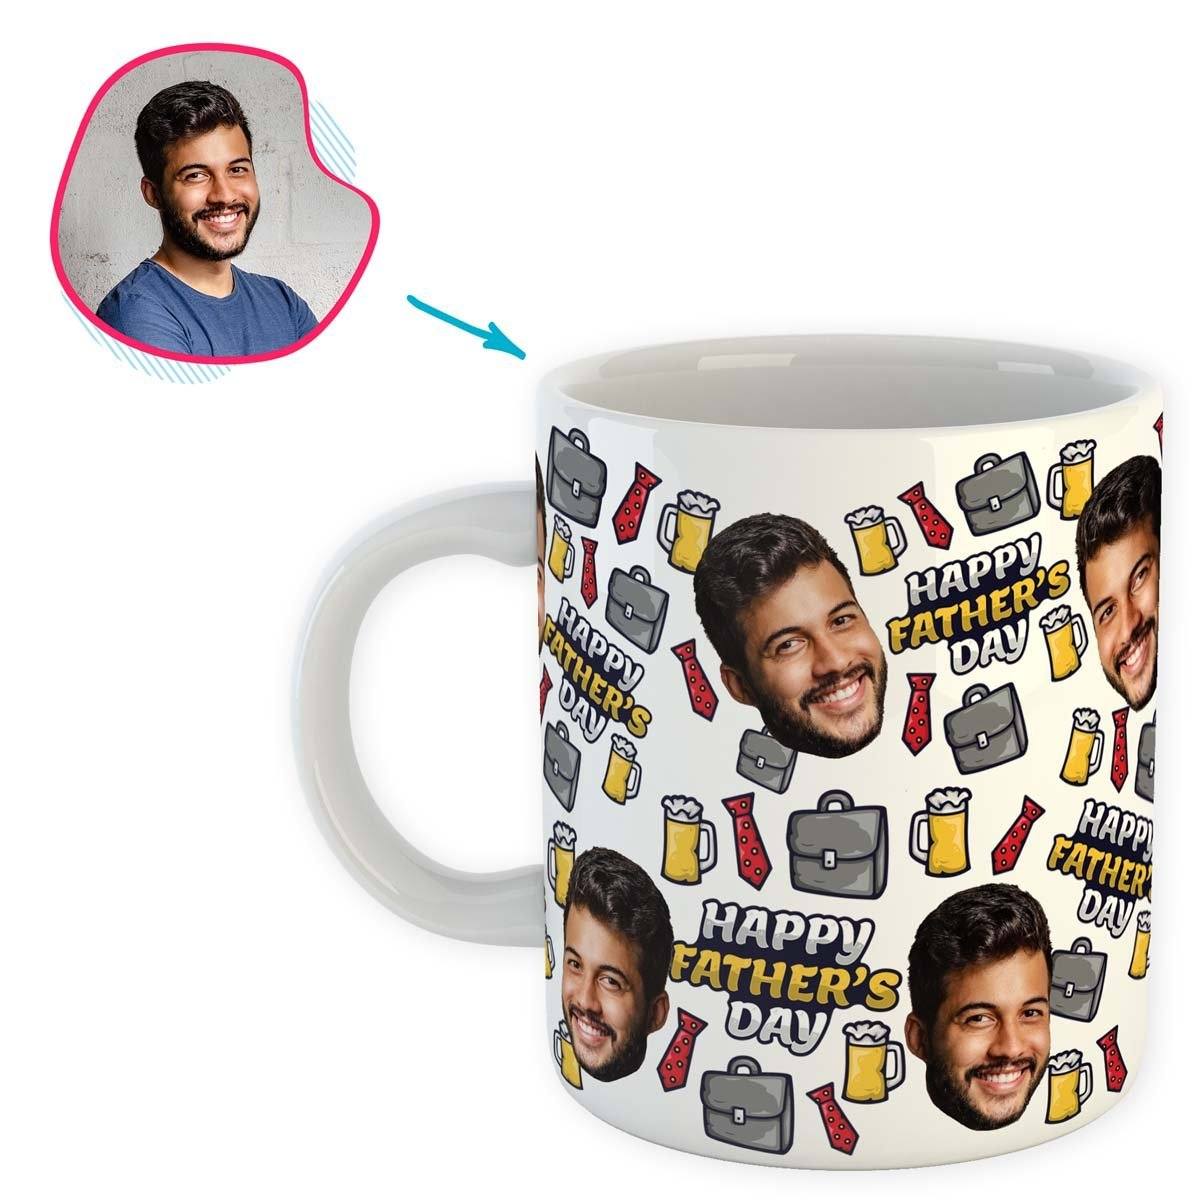 White Fathers Day personalized mug with photo of face printed on it